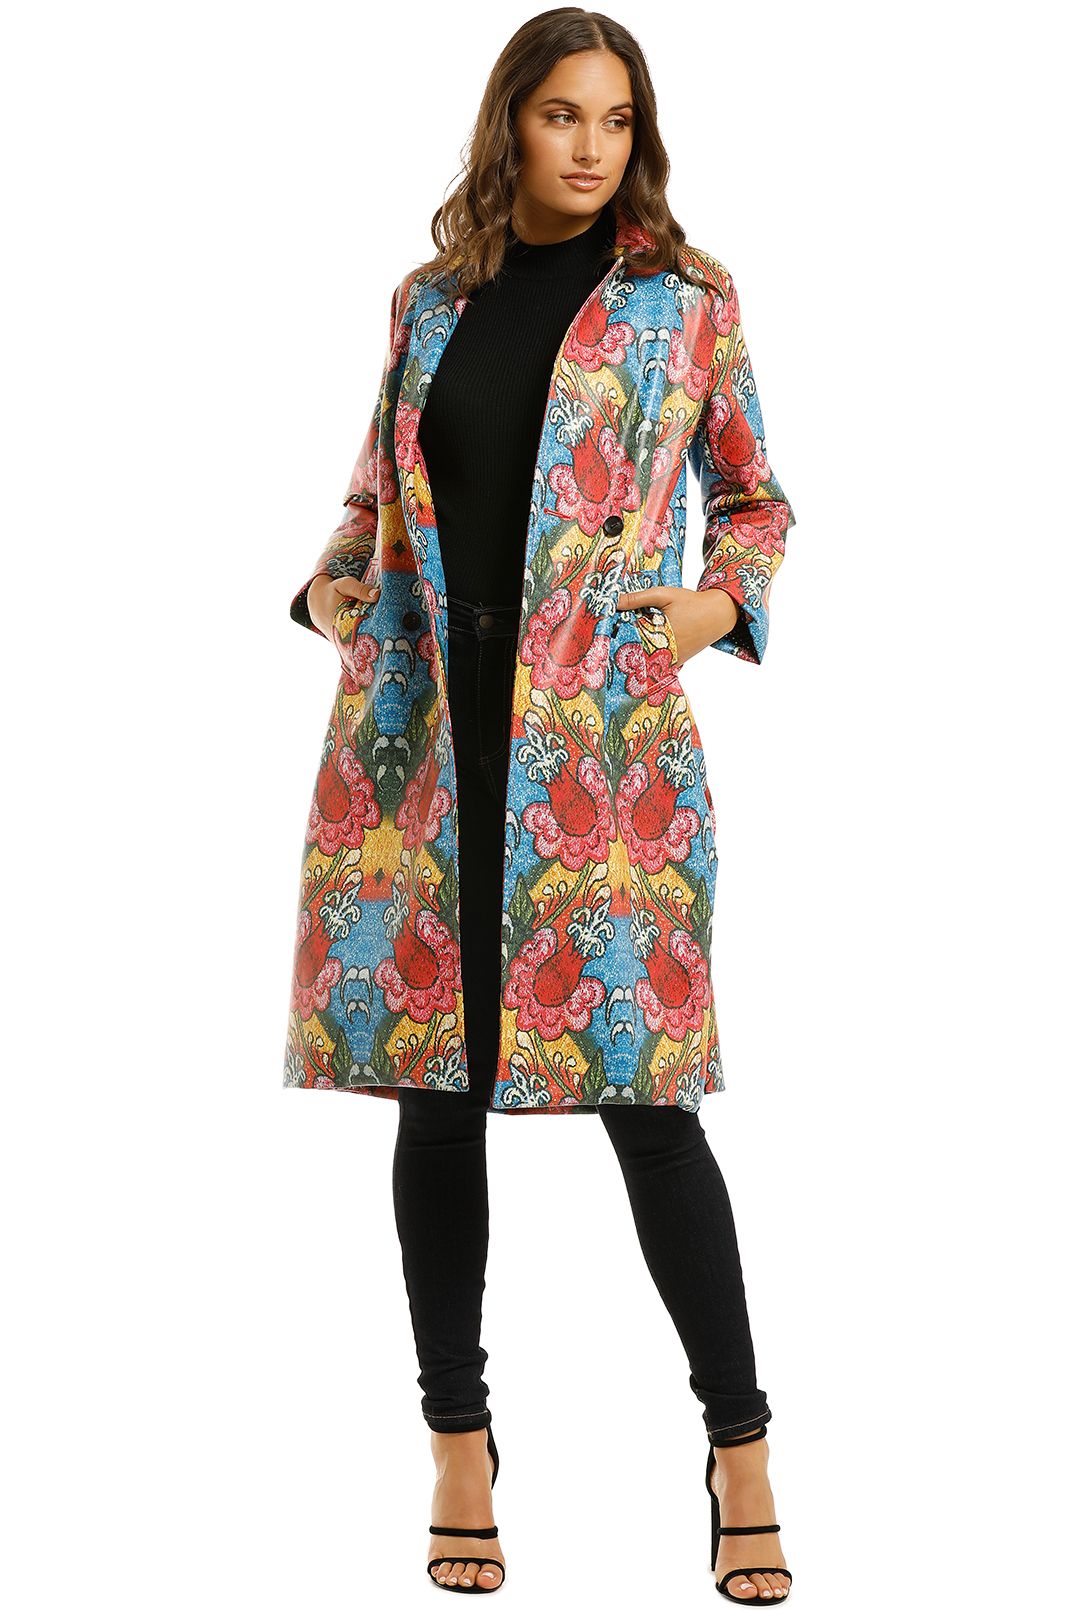 Curate-by-Trelise-Cooper-Warm-Again-Coat-Floral-Front